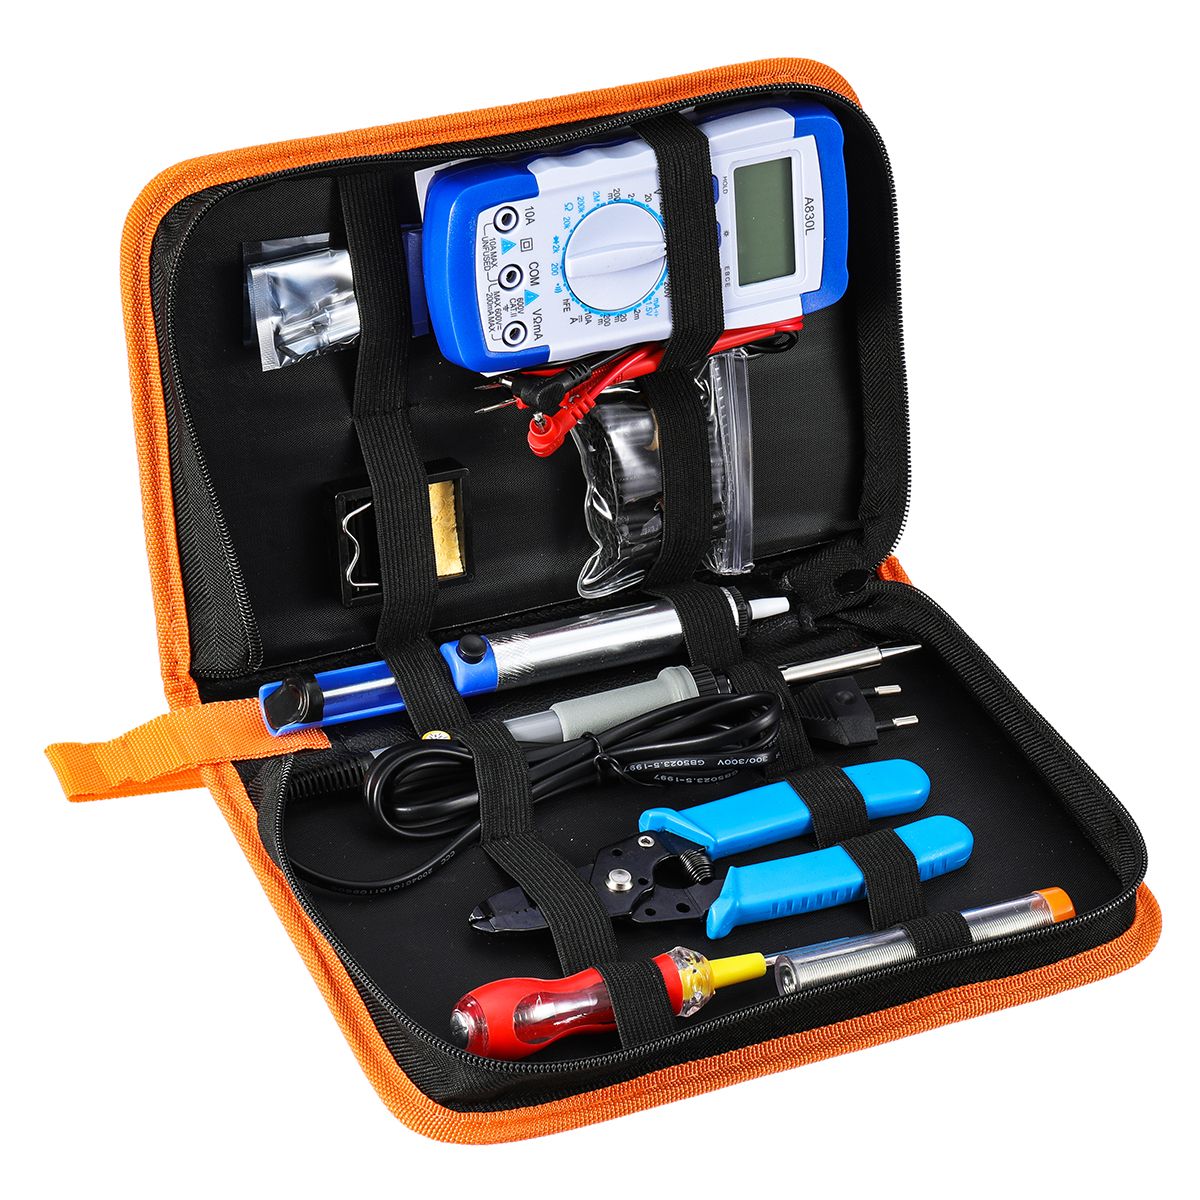 60W-Soldering-Iron-Kit-Tips-Electronic-Welding-Tool-Adjustable-Temperature-Case-1407153